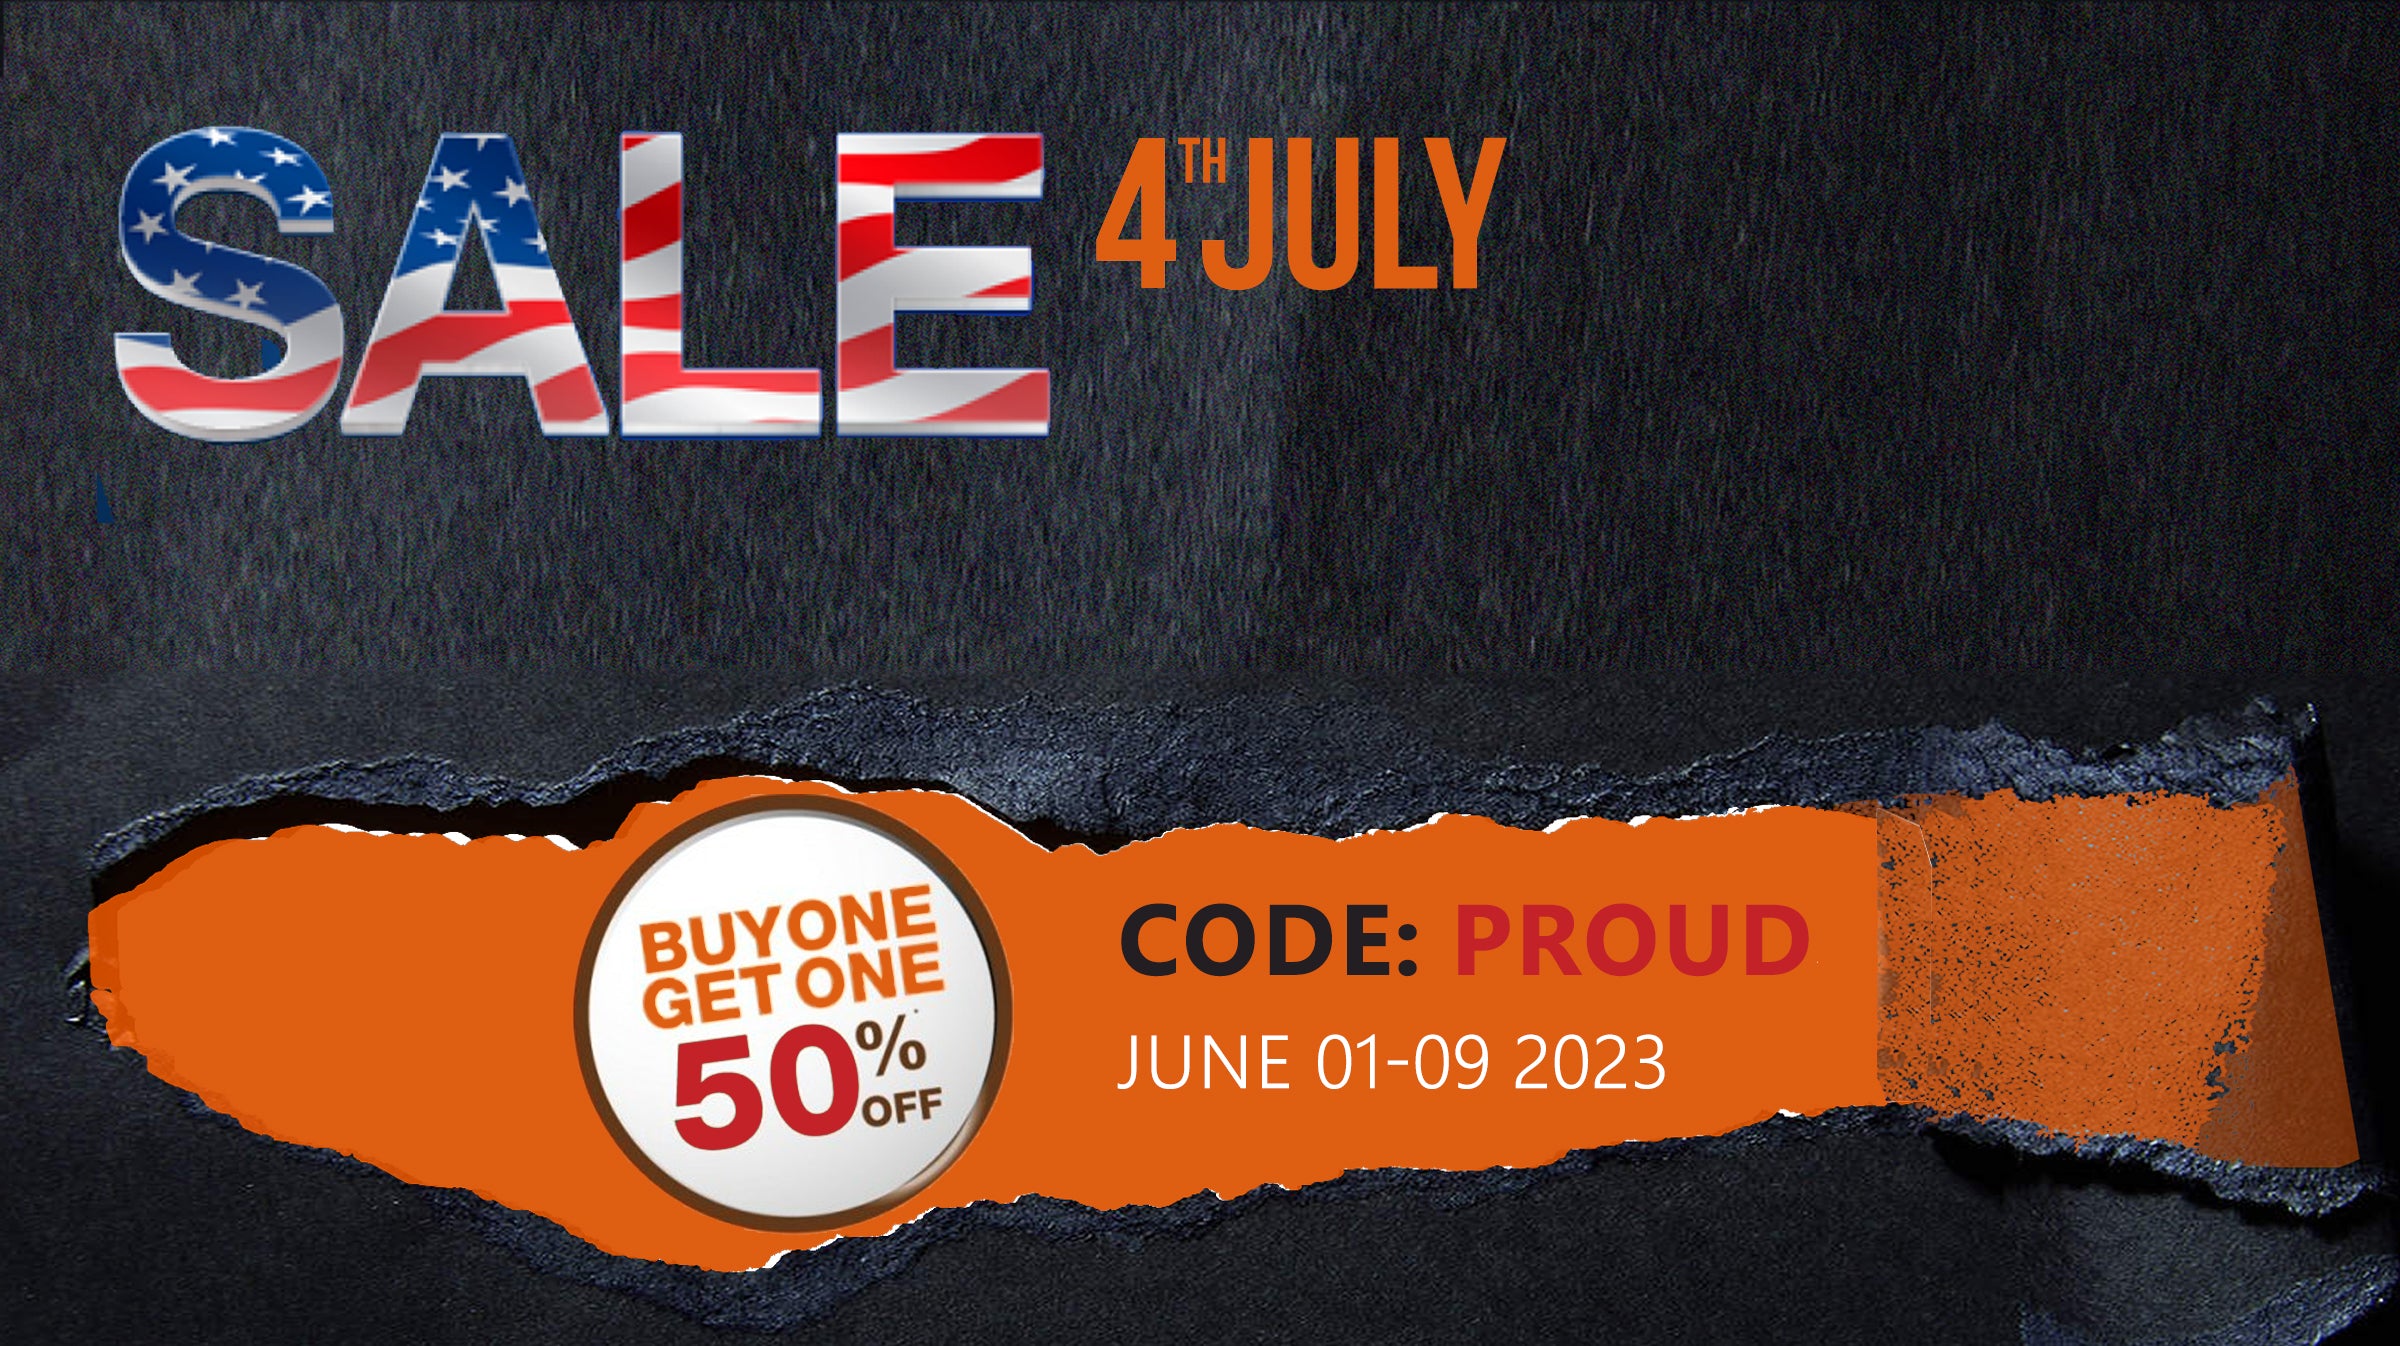 INDEPENDENCE DAY SALE